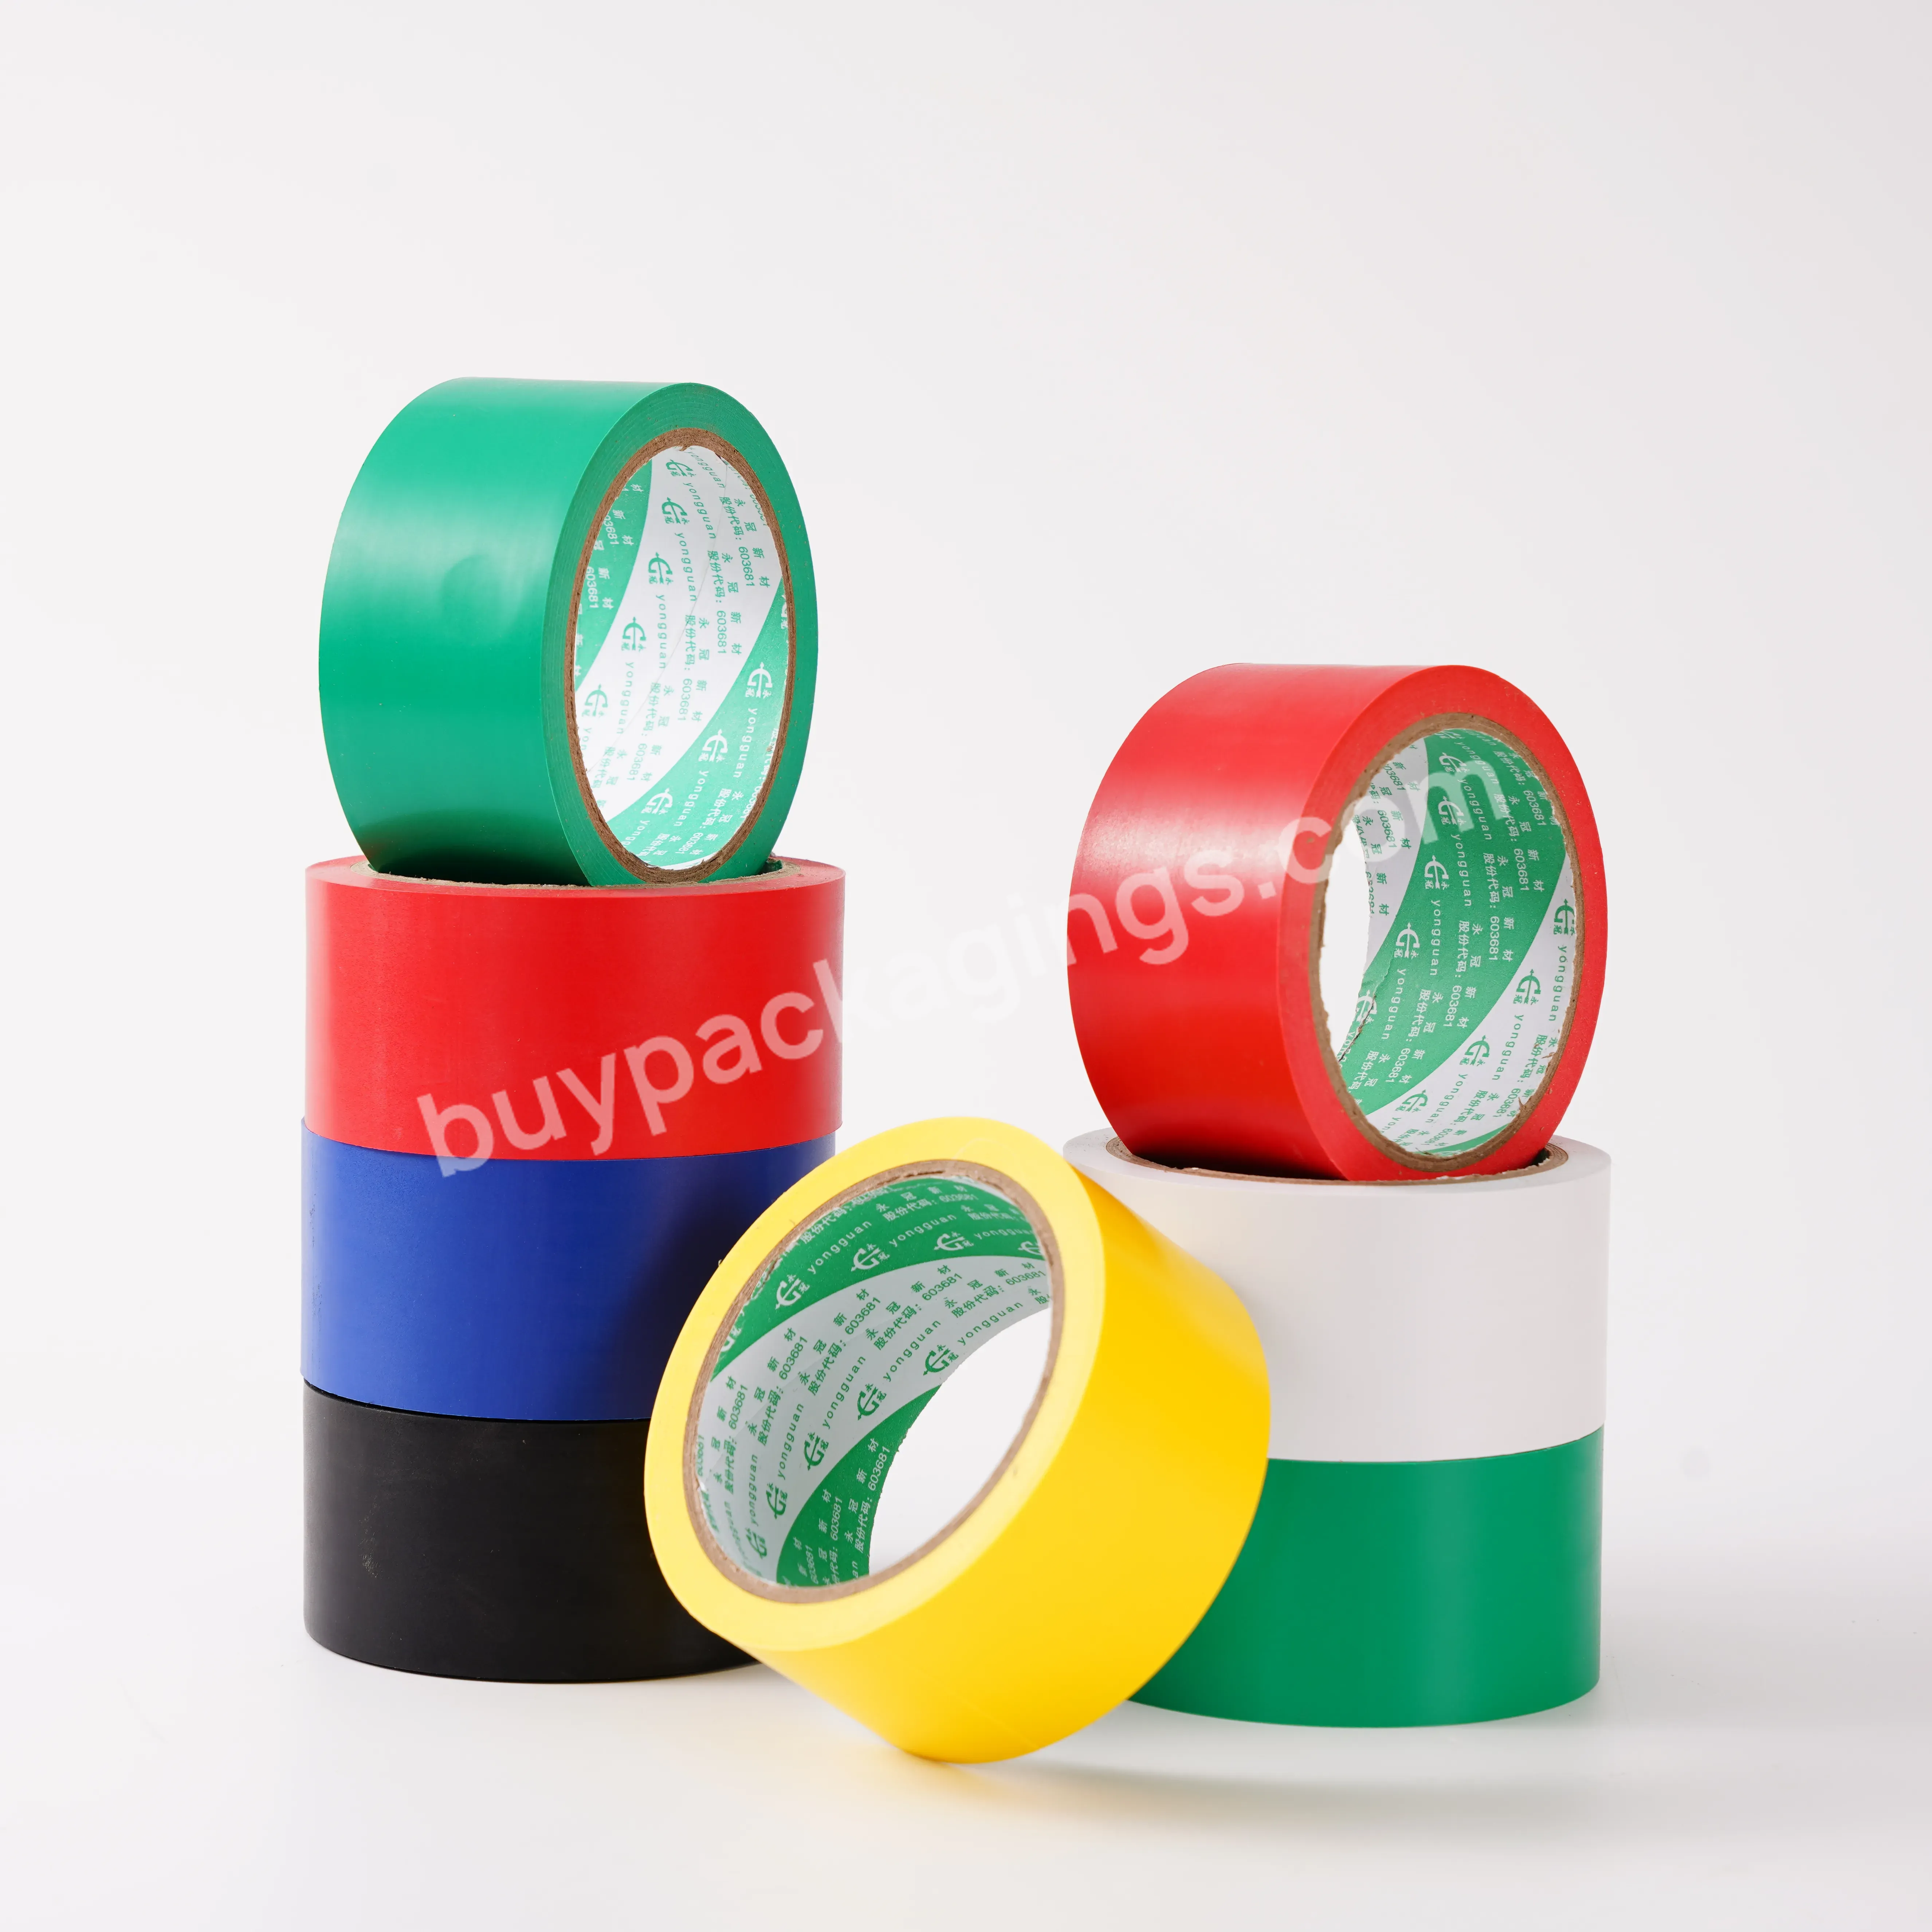 Custom Floor Marking Caution Pvc Hazard Lane Safety Warning Adhesive Safety Tape For Industry - Buy Warning Tape Red White,Pe Materials Floor Marking Tape Warning Film For Warnings,Security Construction Tape.